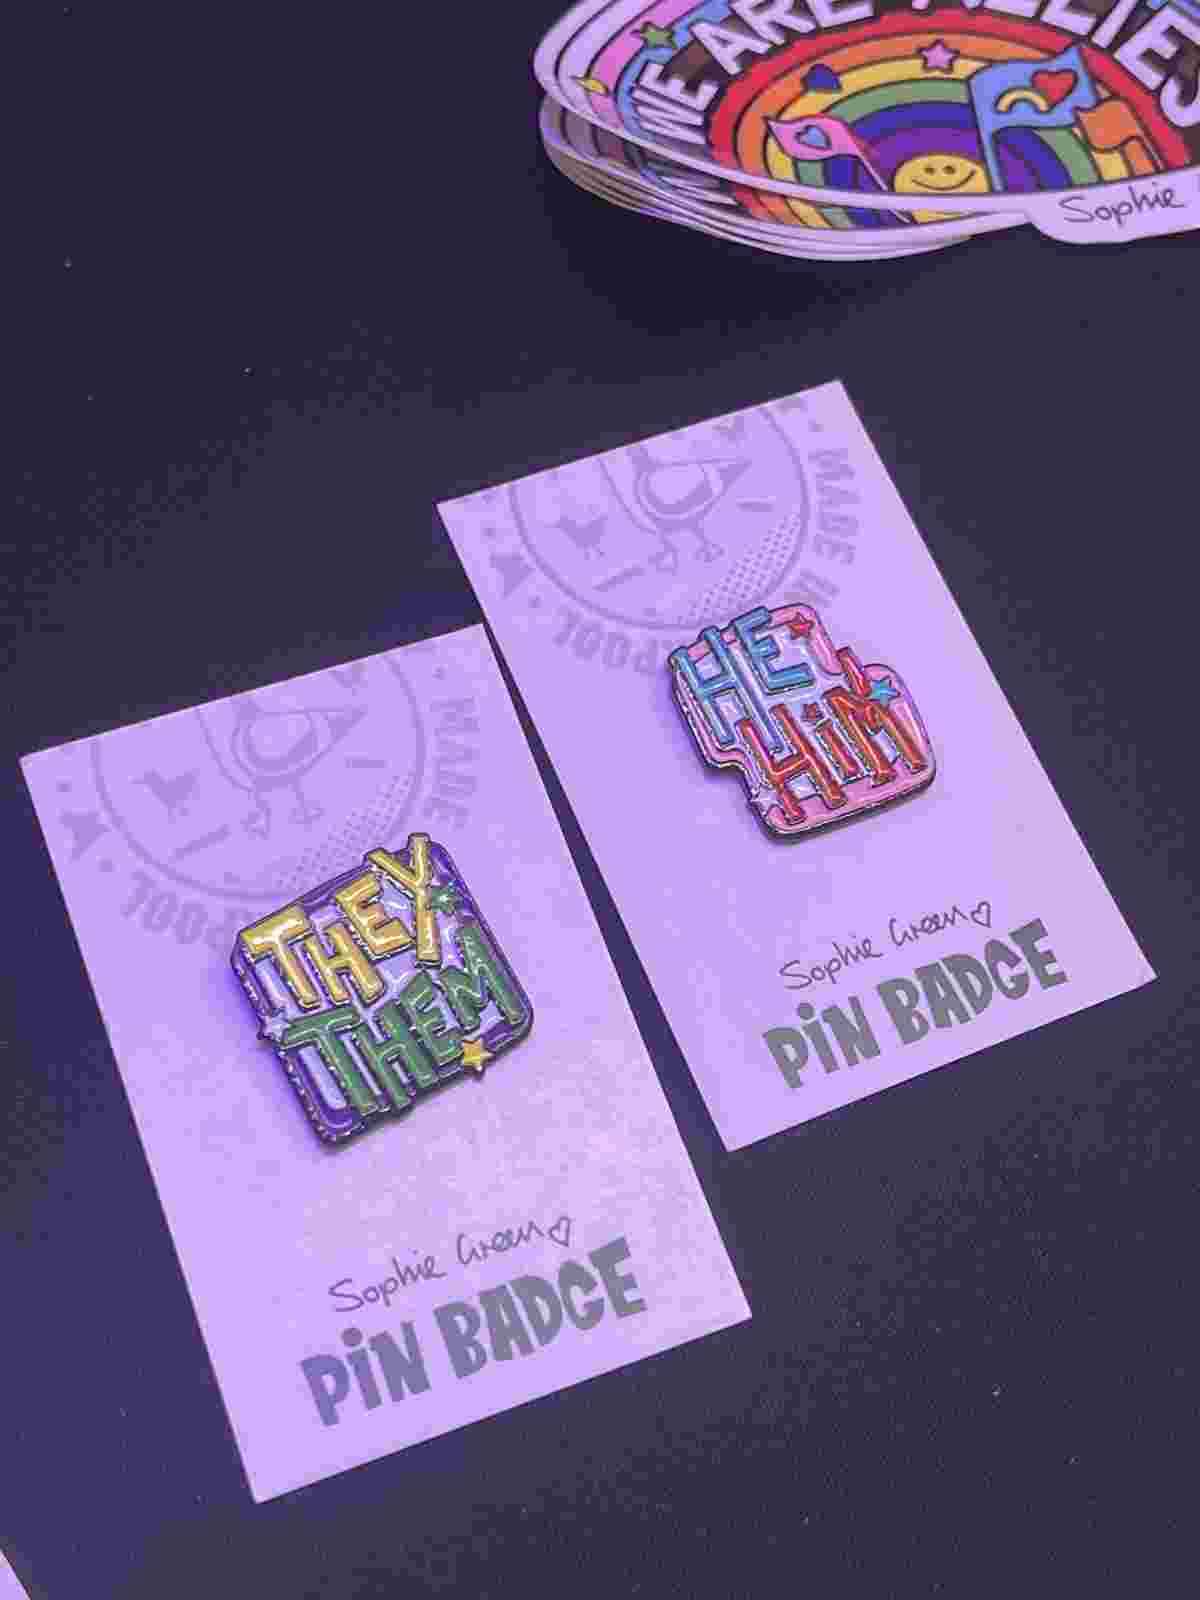 Meal pin badges showing the pronouns They/Them and He/Him